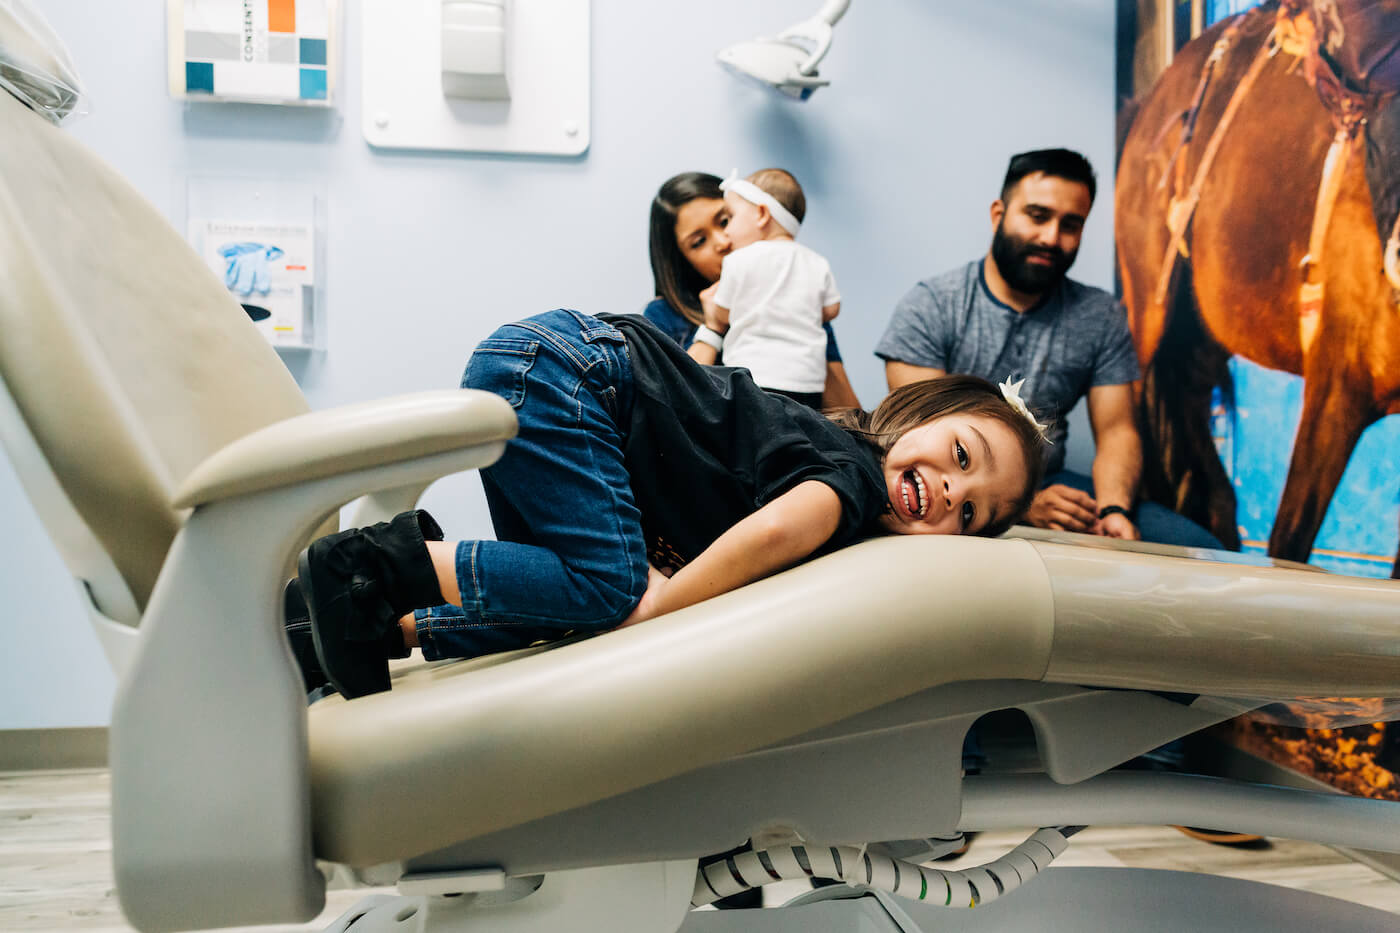 A child playing in the dentist chair at the dentist. Sometimes, working with patients can be difficult, and that takes experience to know how to deal with.